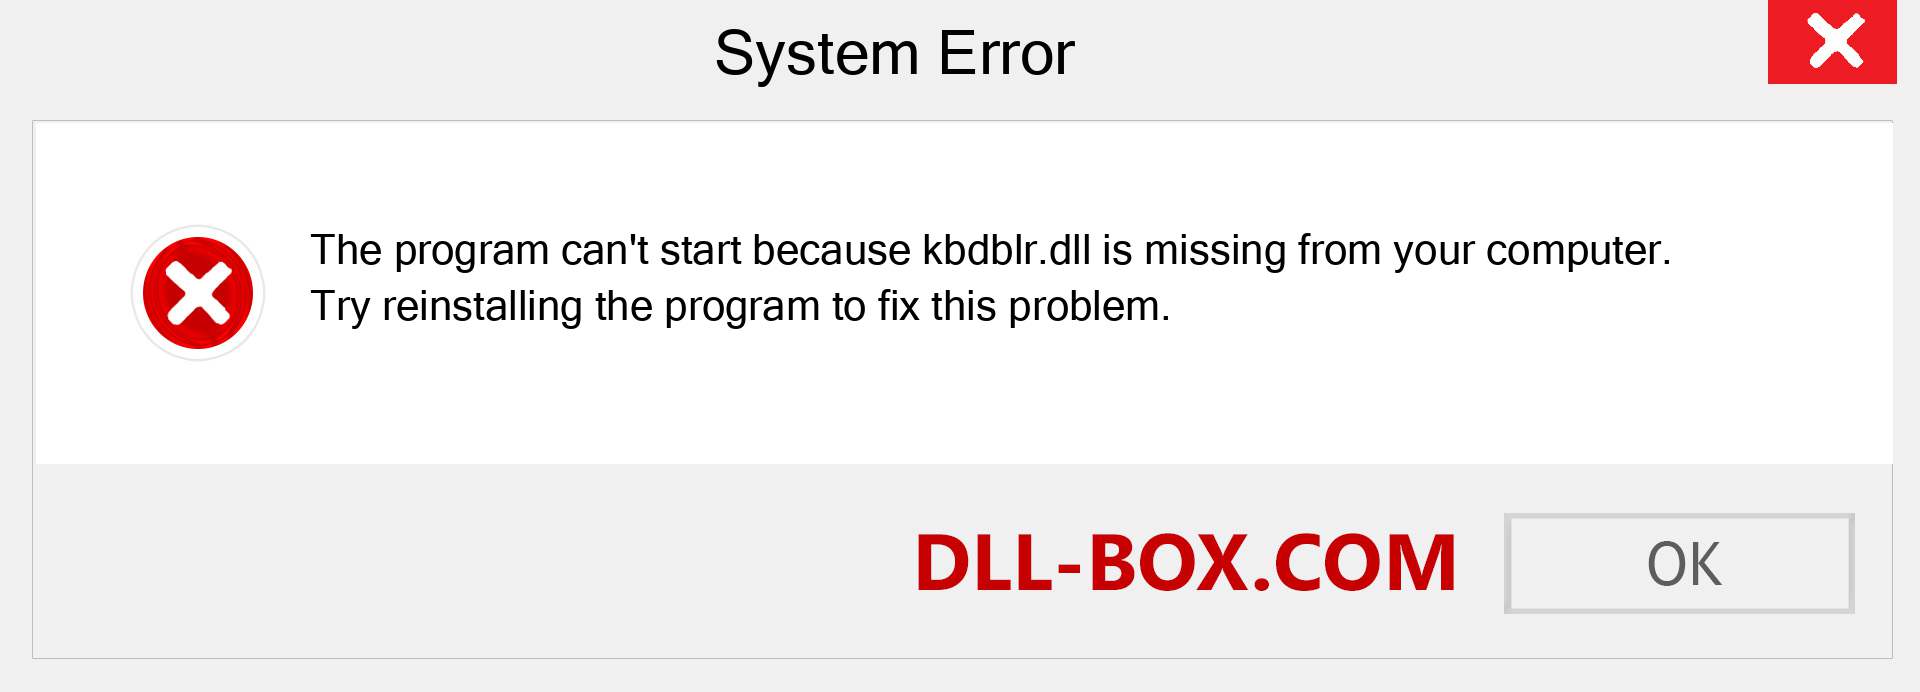  kbdblr.dll file is missing?. Download for Windows 7, 8, 10 - Fix  kbdblr dll Missing Error on Windows, photos, images